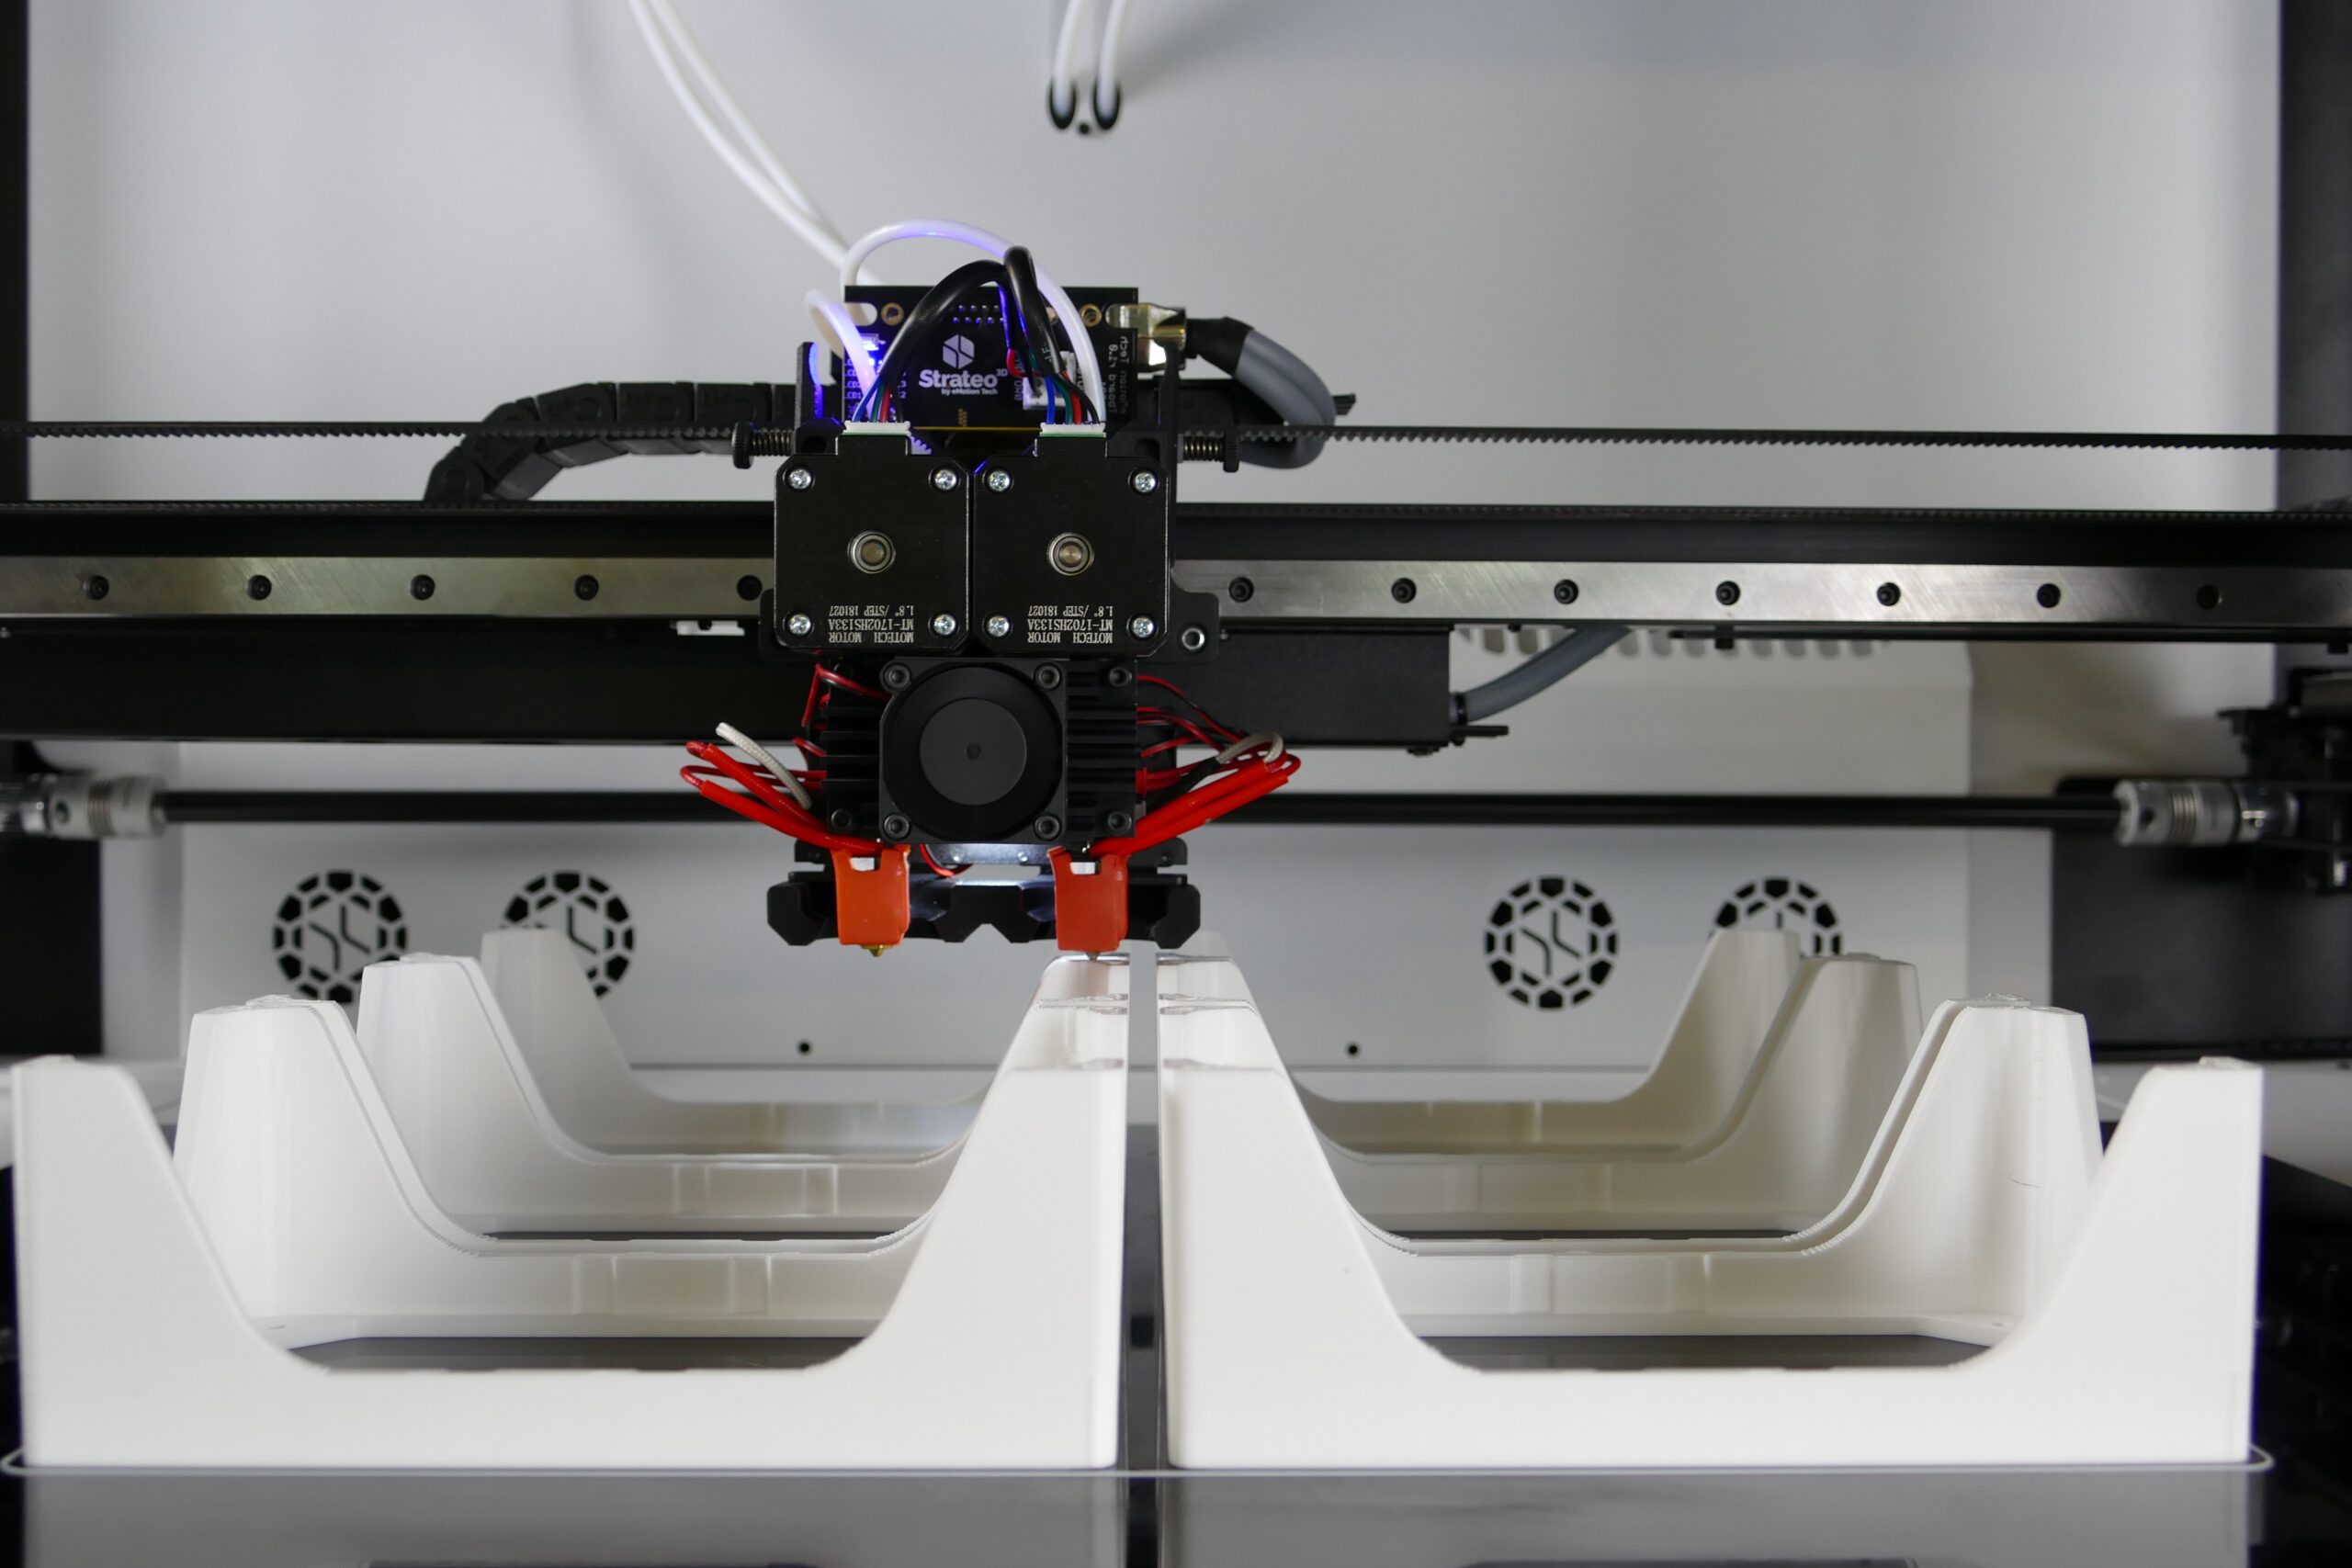 A 3D FDM printer is printing parts using from thermoplastic material